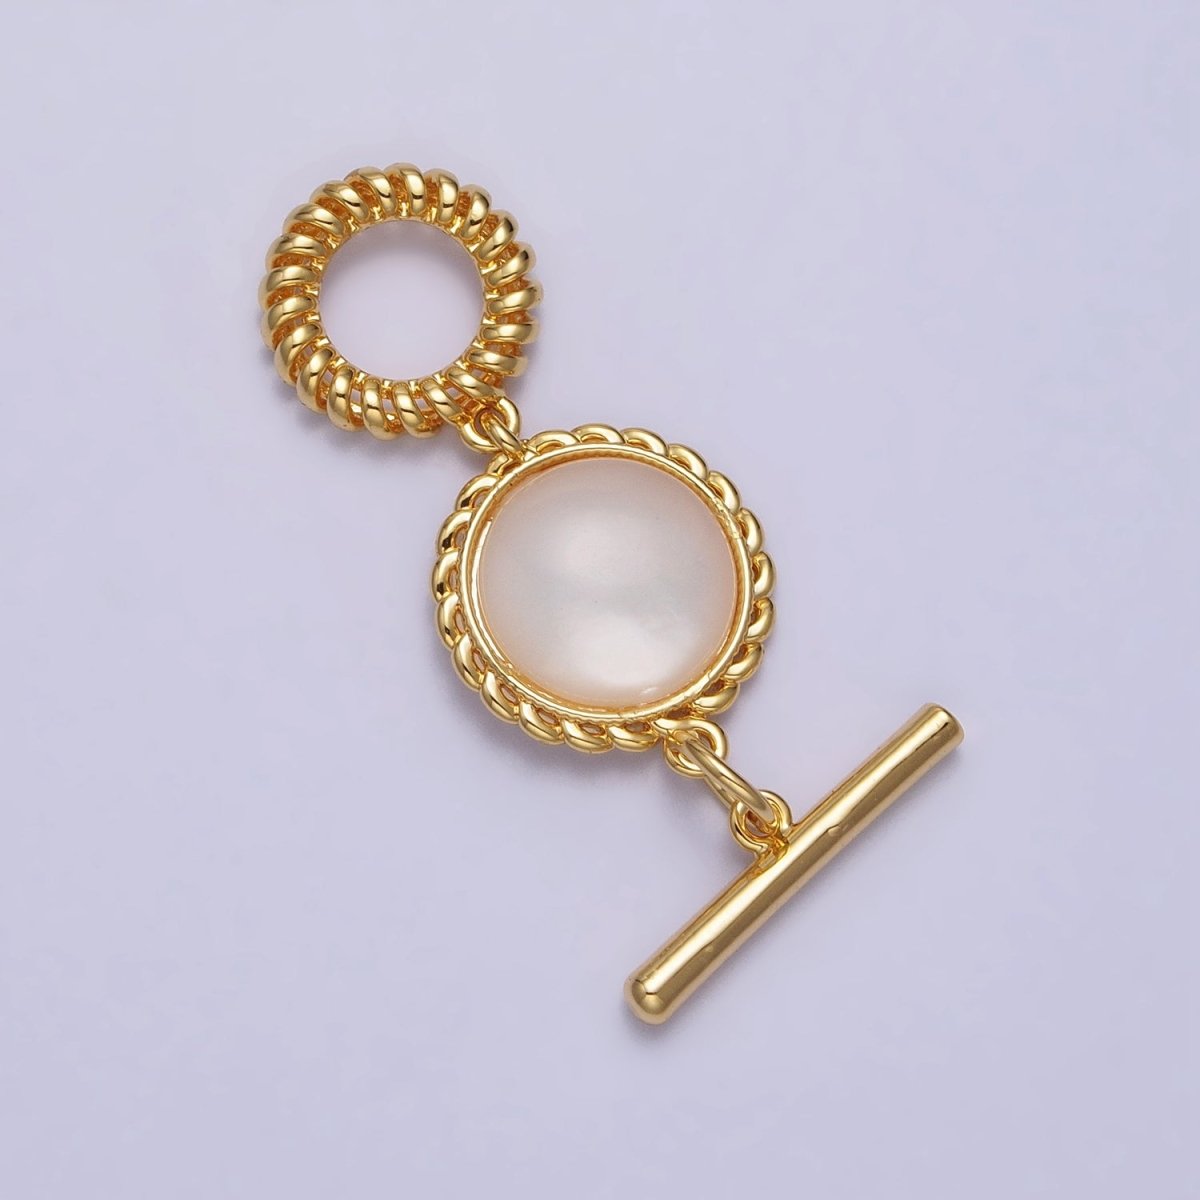 Decorative Pearl OT Clasp for Necklace Bracelet Toggle Clasp Twisted Rope Gold Round Clasp for Jewelry Making Supply Z-063 - DLUXCA